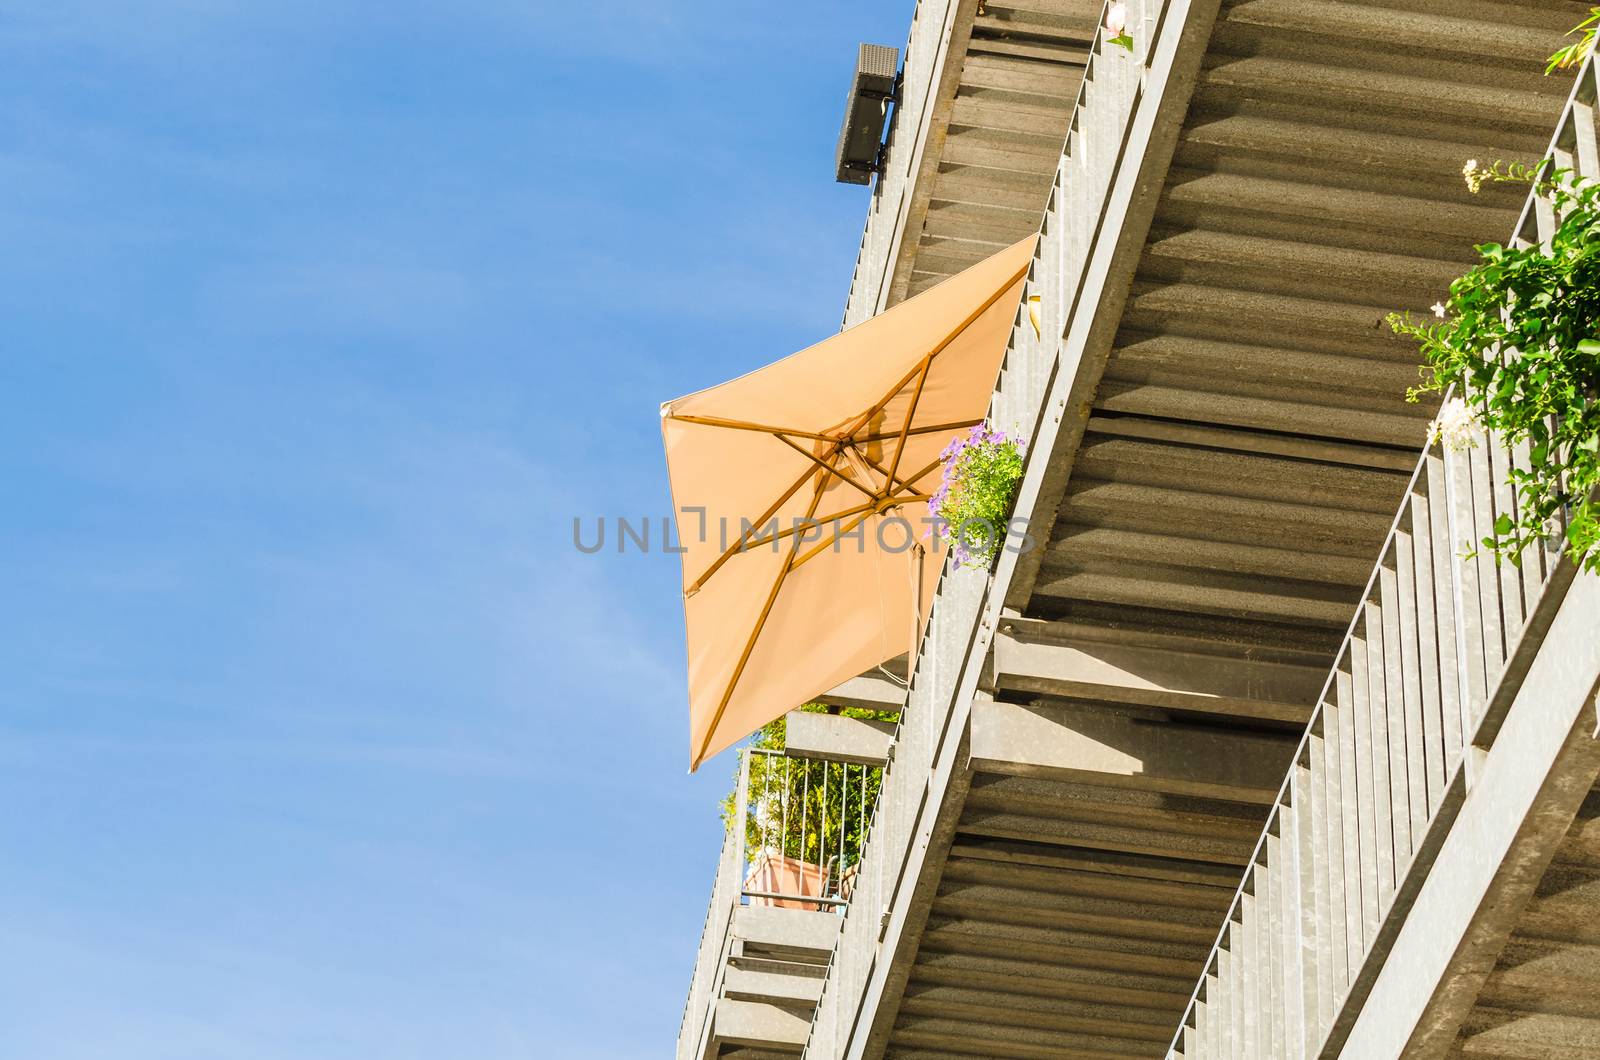 Sunshade on a terrace, view from below.